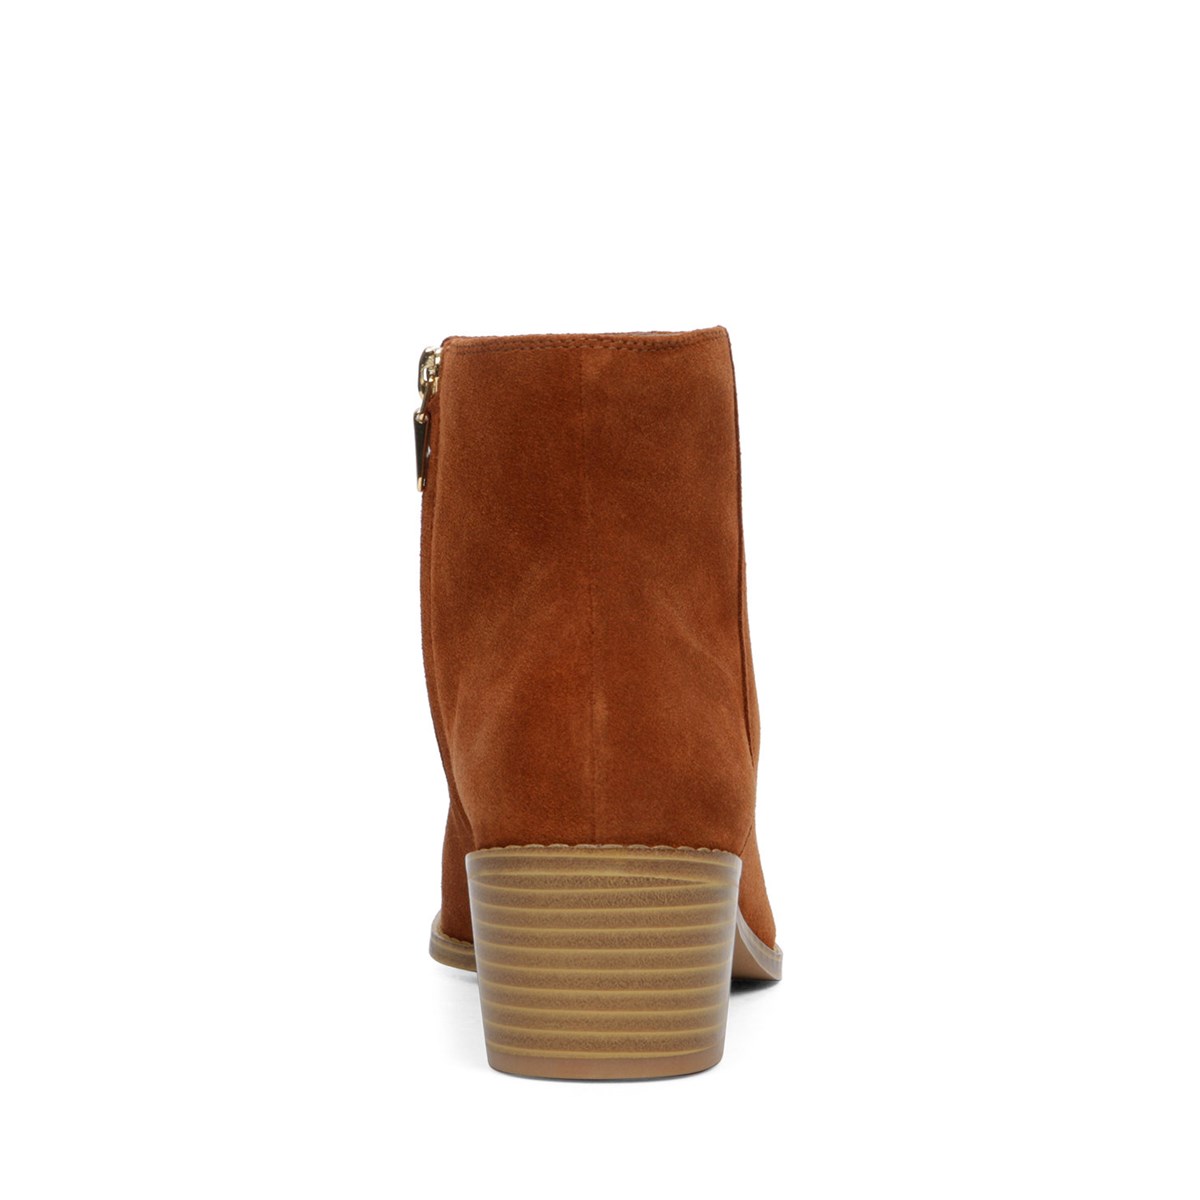 Women's Breccan Myth Camel Suede Ankle Boot | Little Burgundy